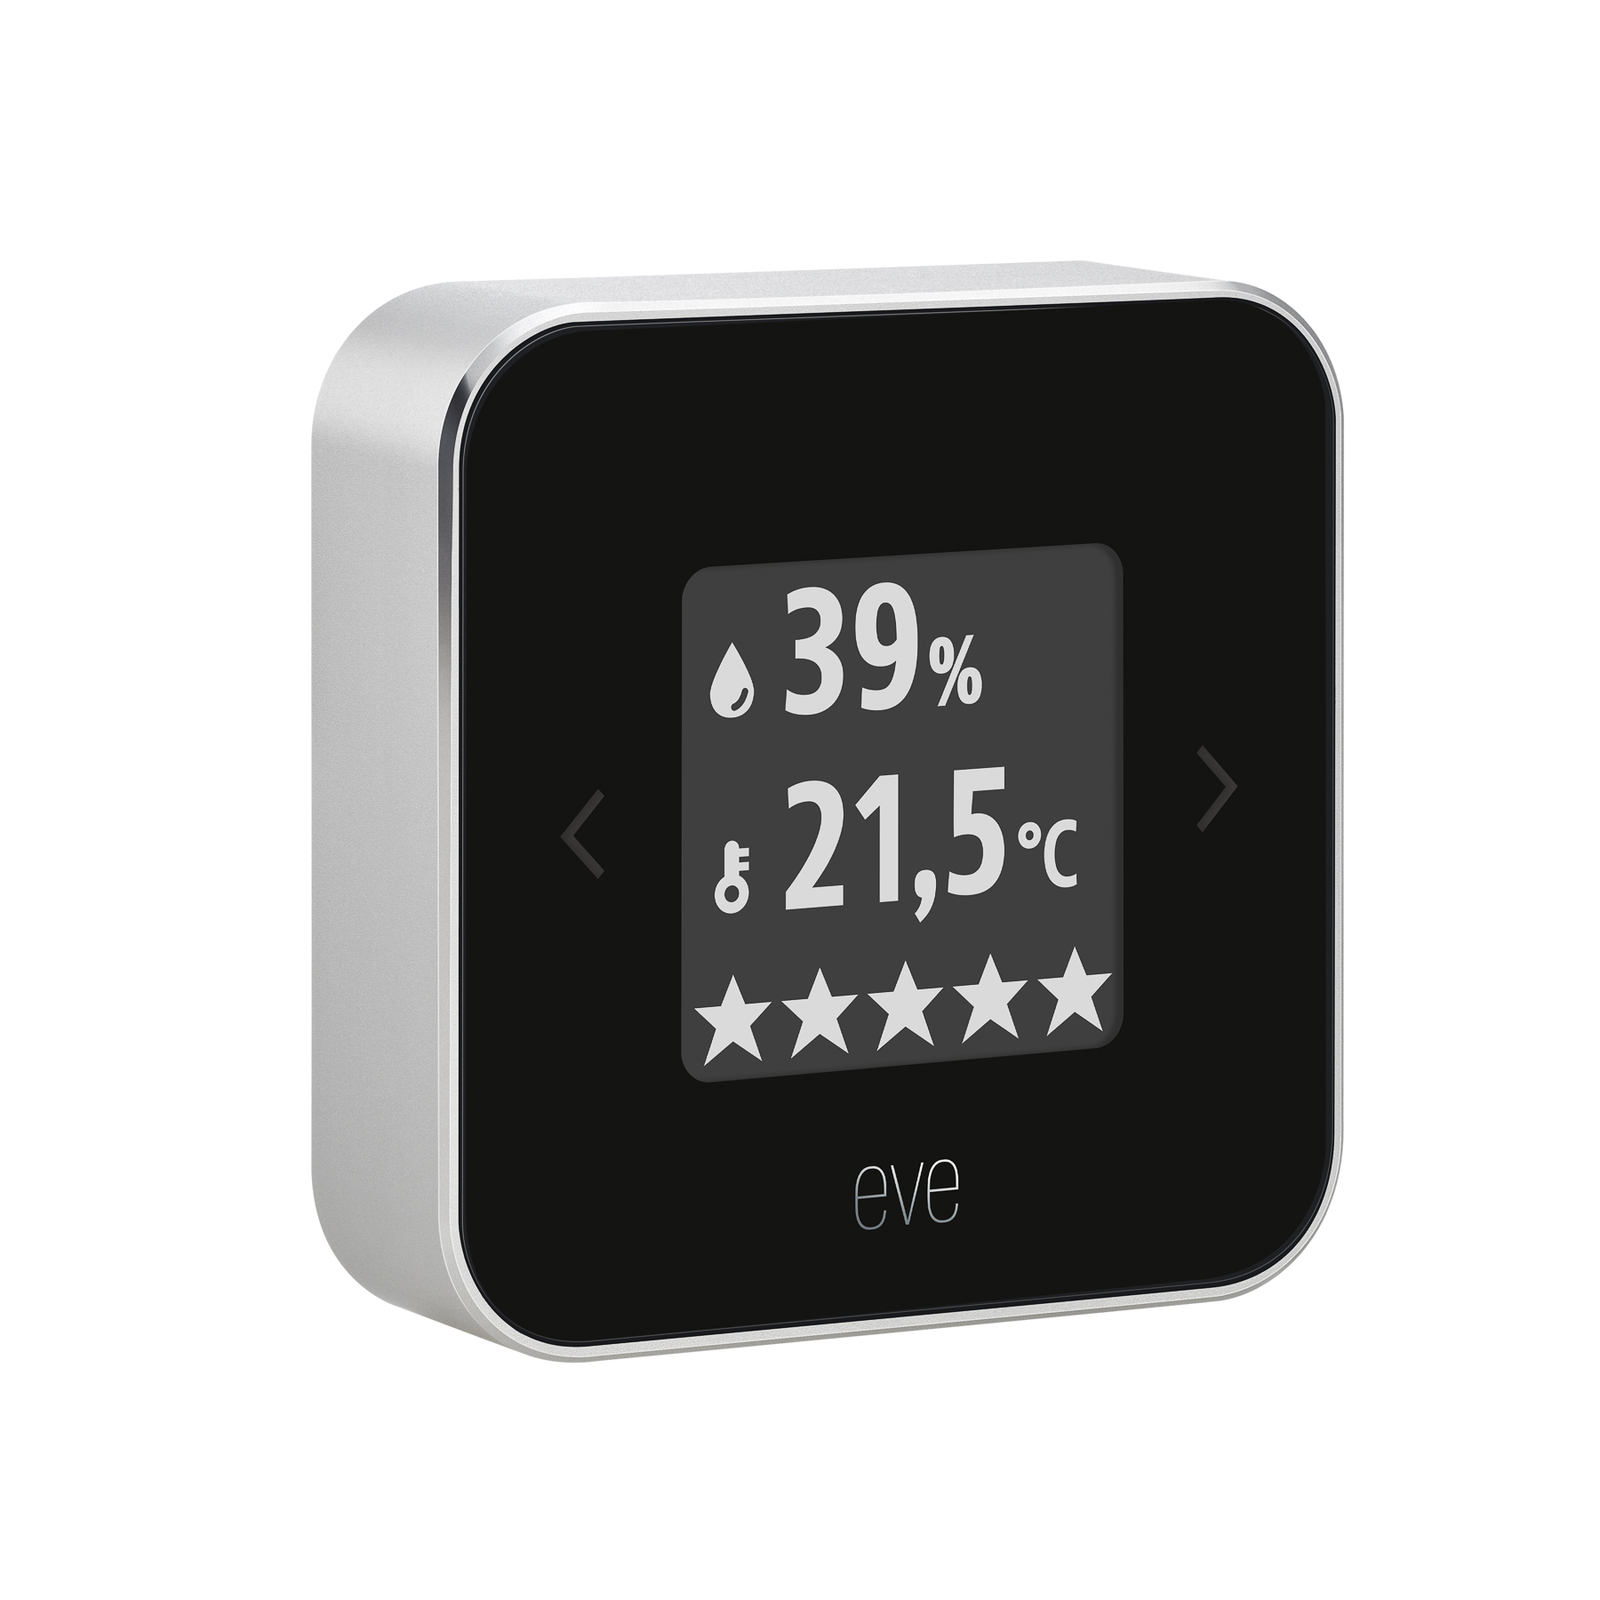 Eve Room indoor climate and air quality monitor